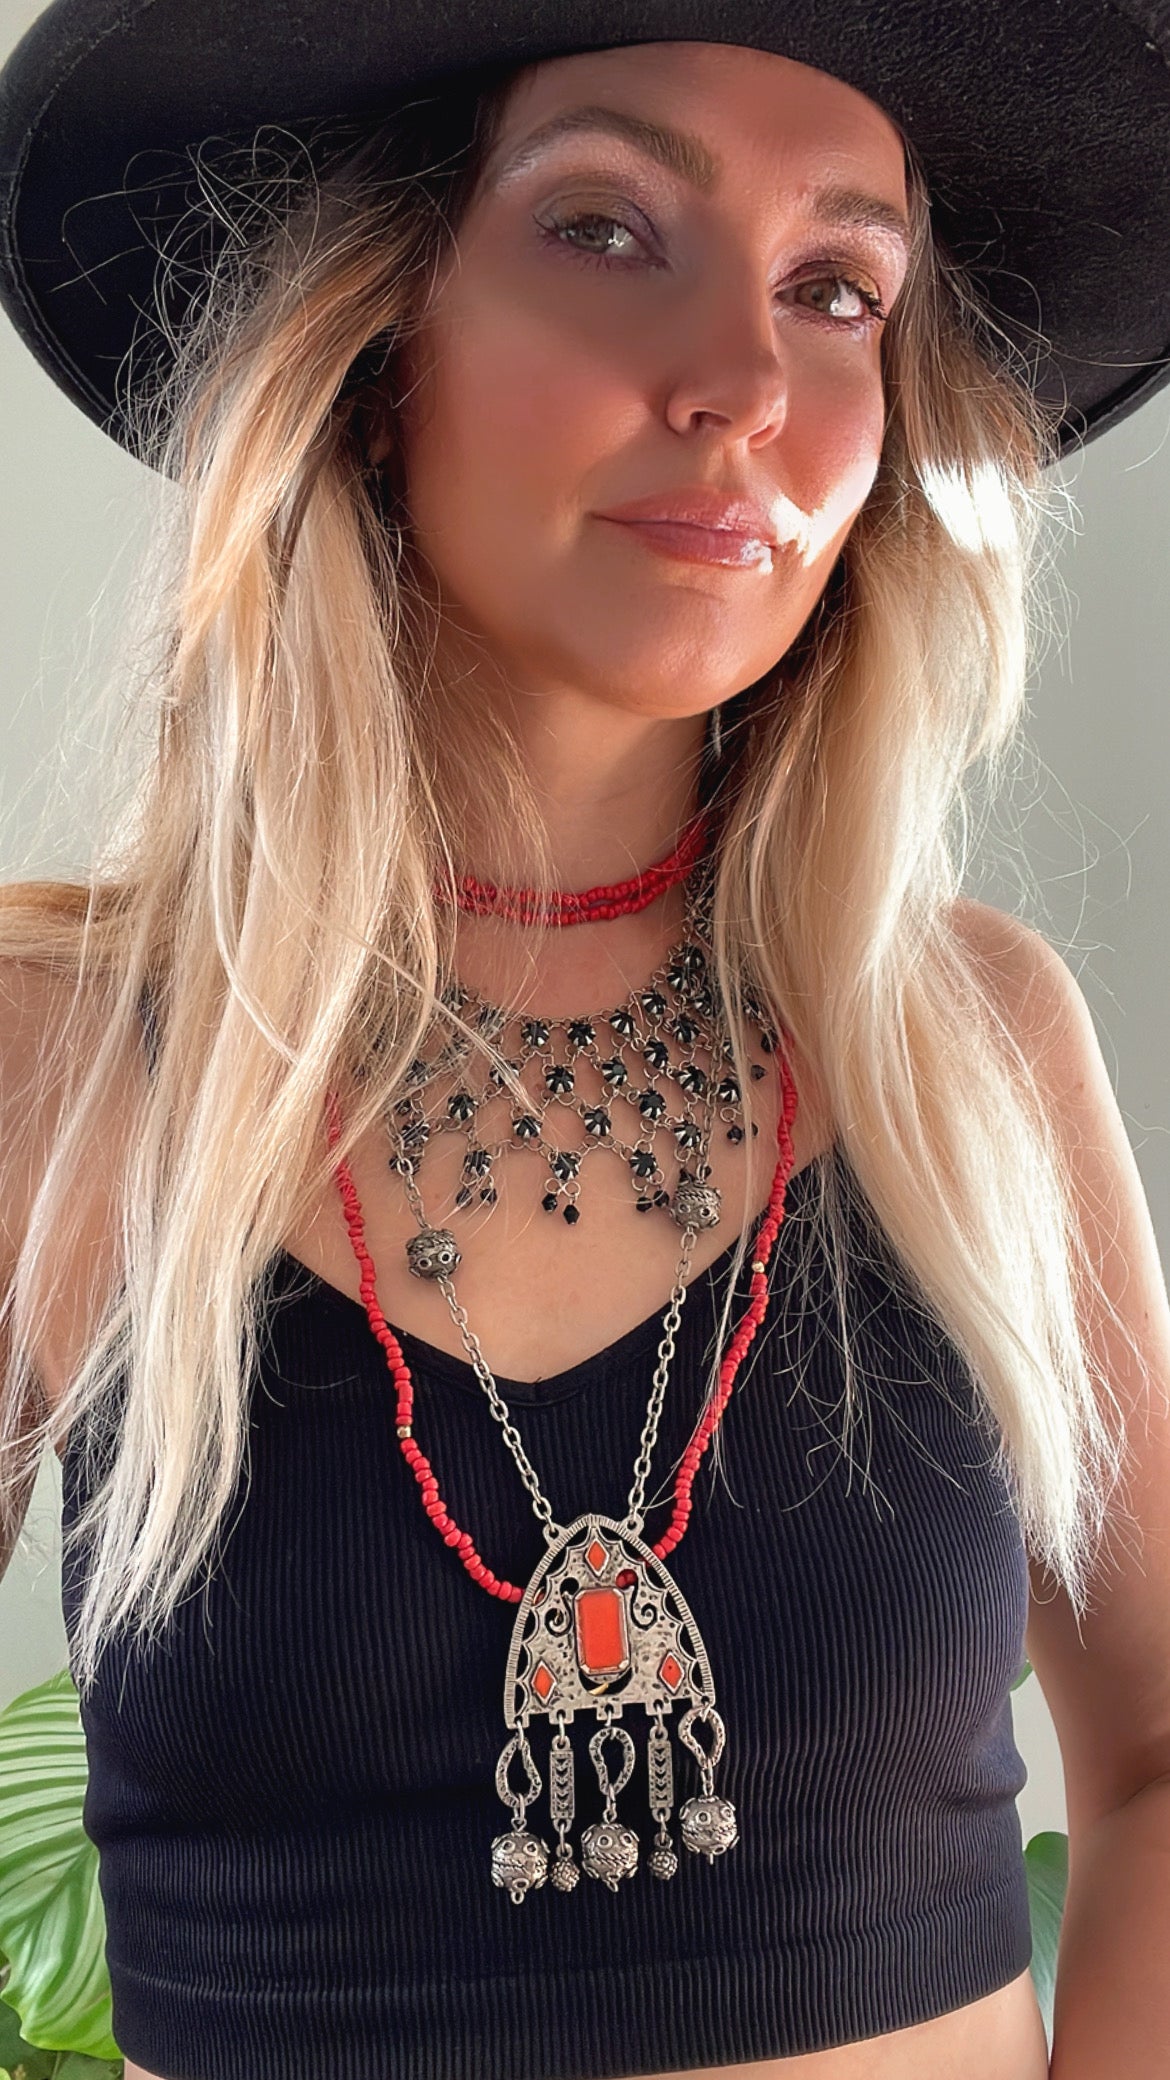 Eclectic necklaces